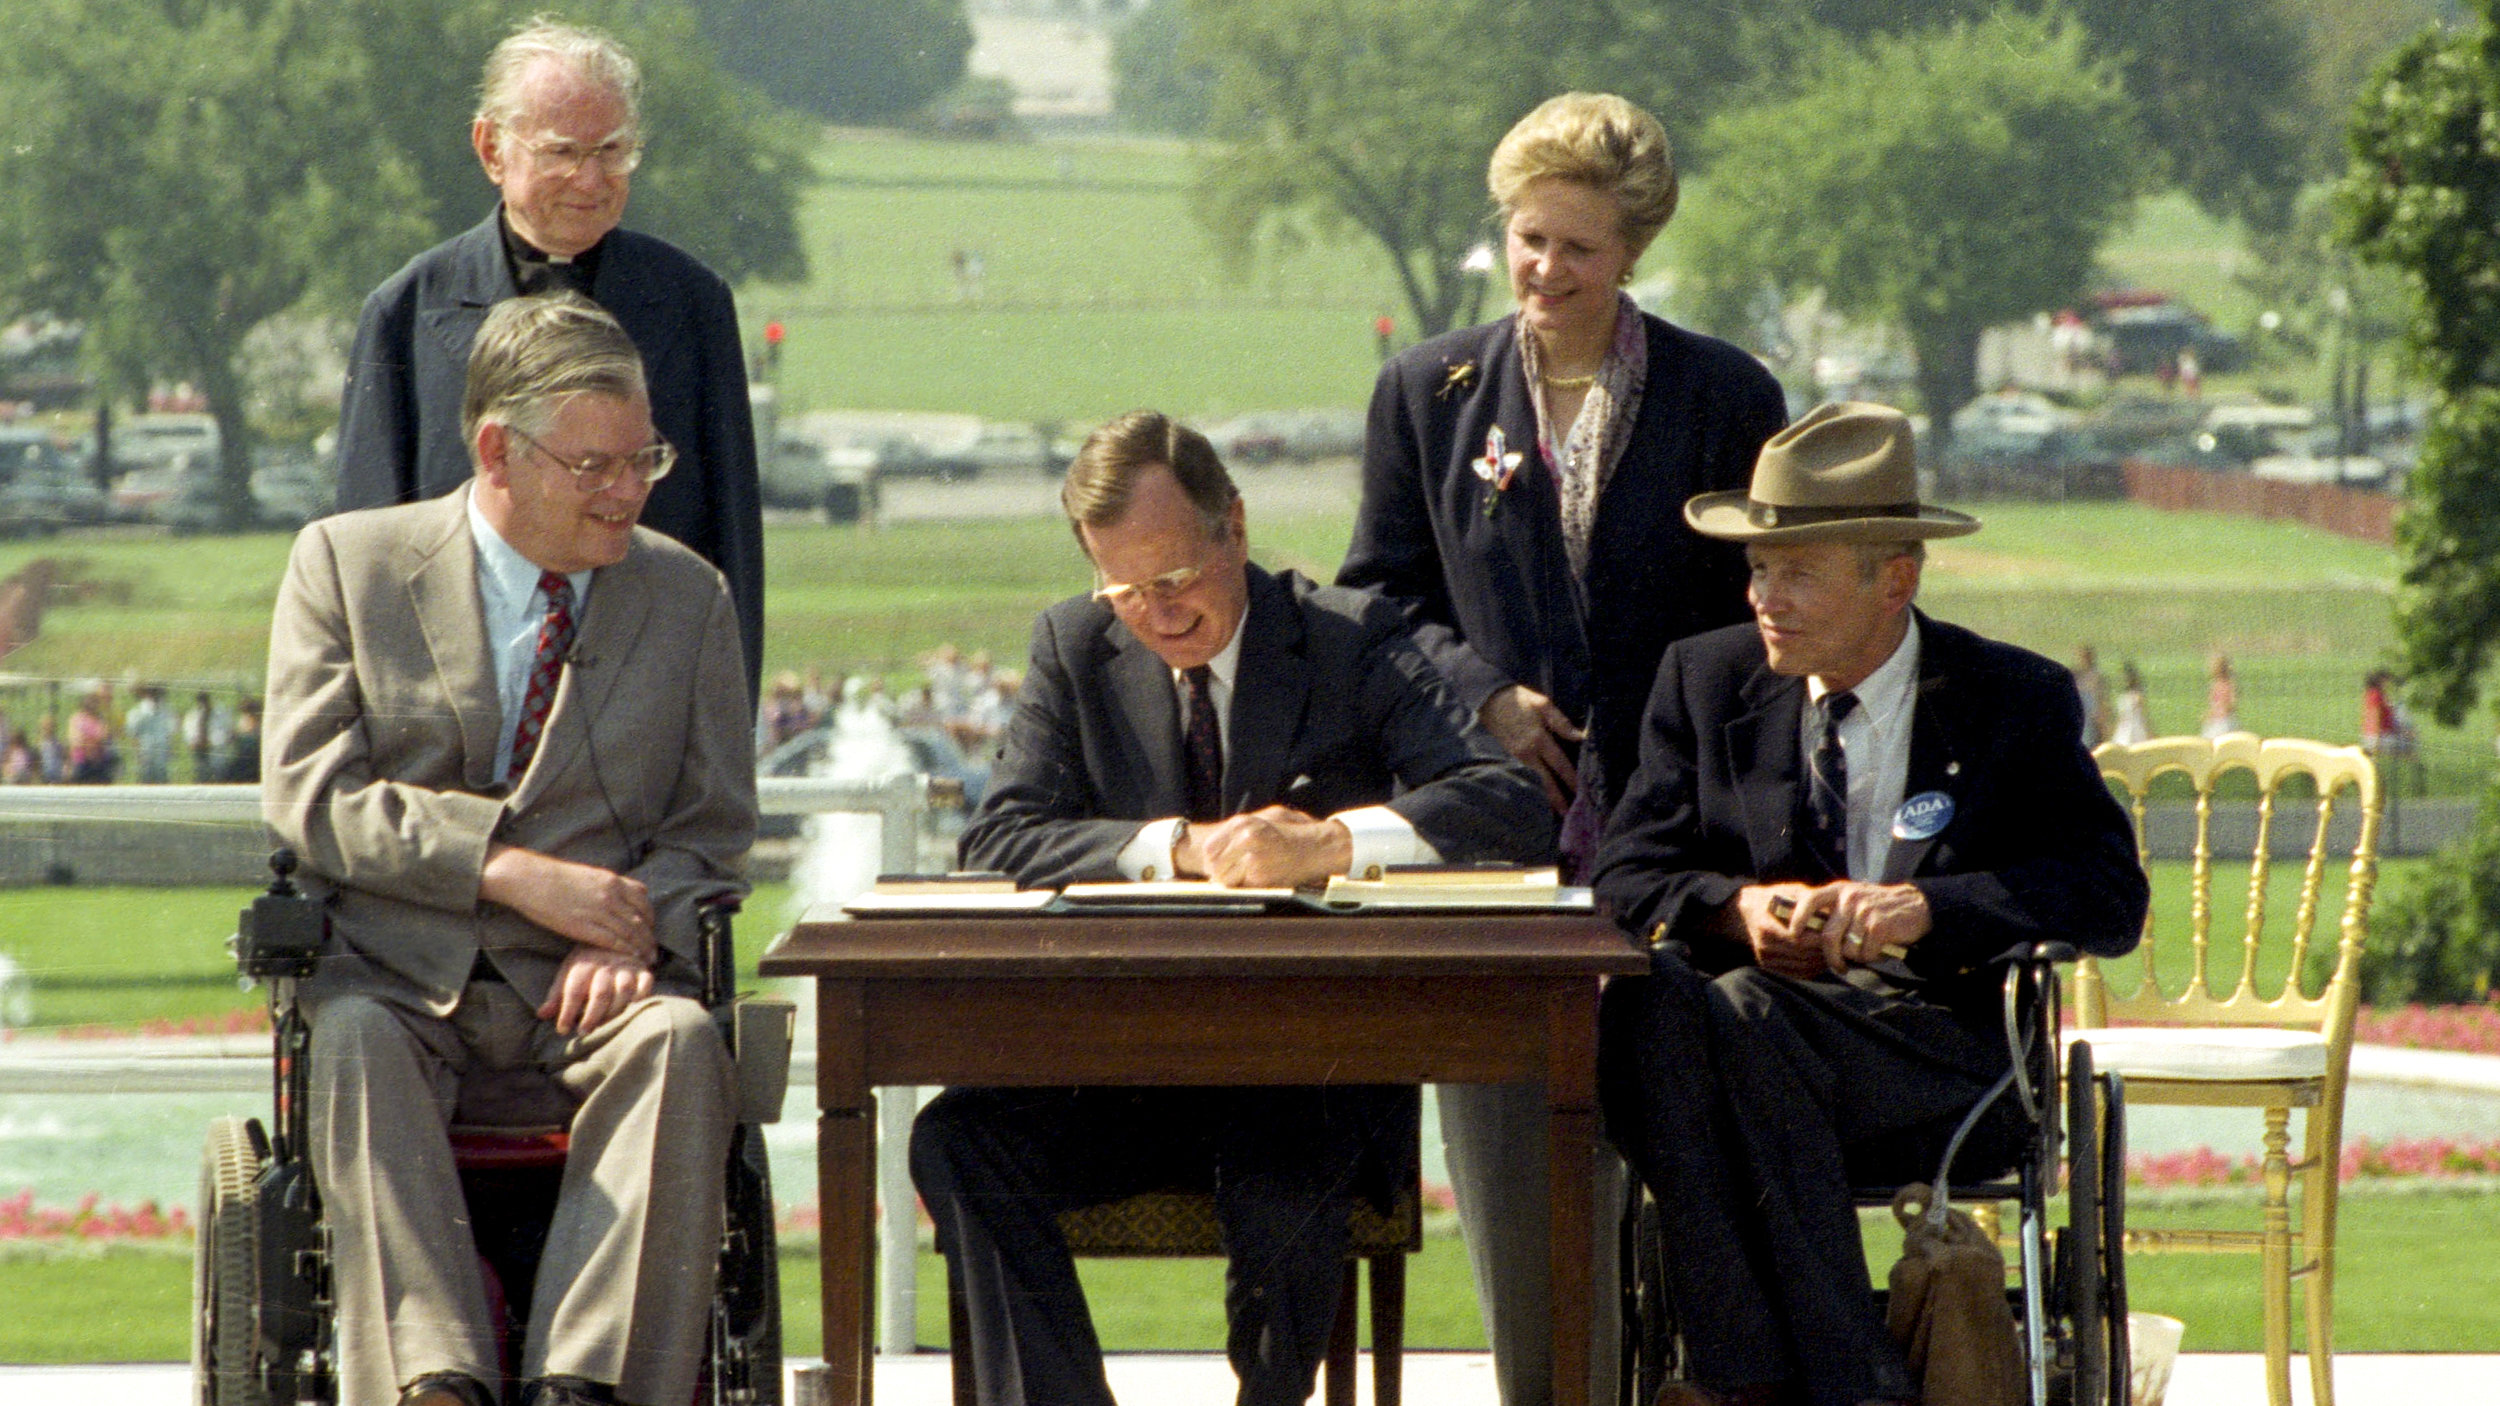 The signing of the ADA in 1990.